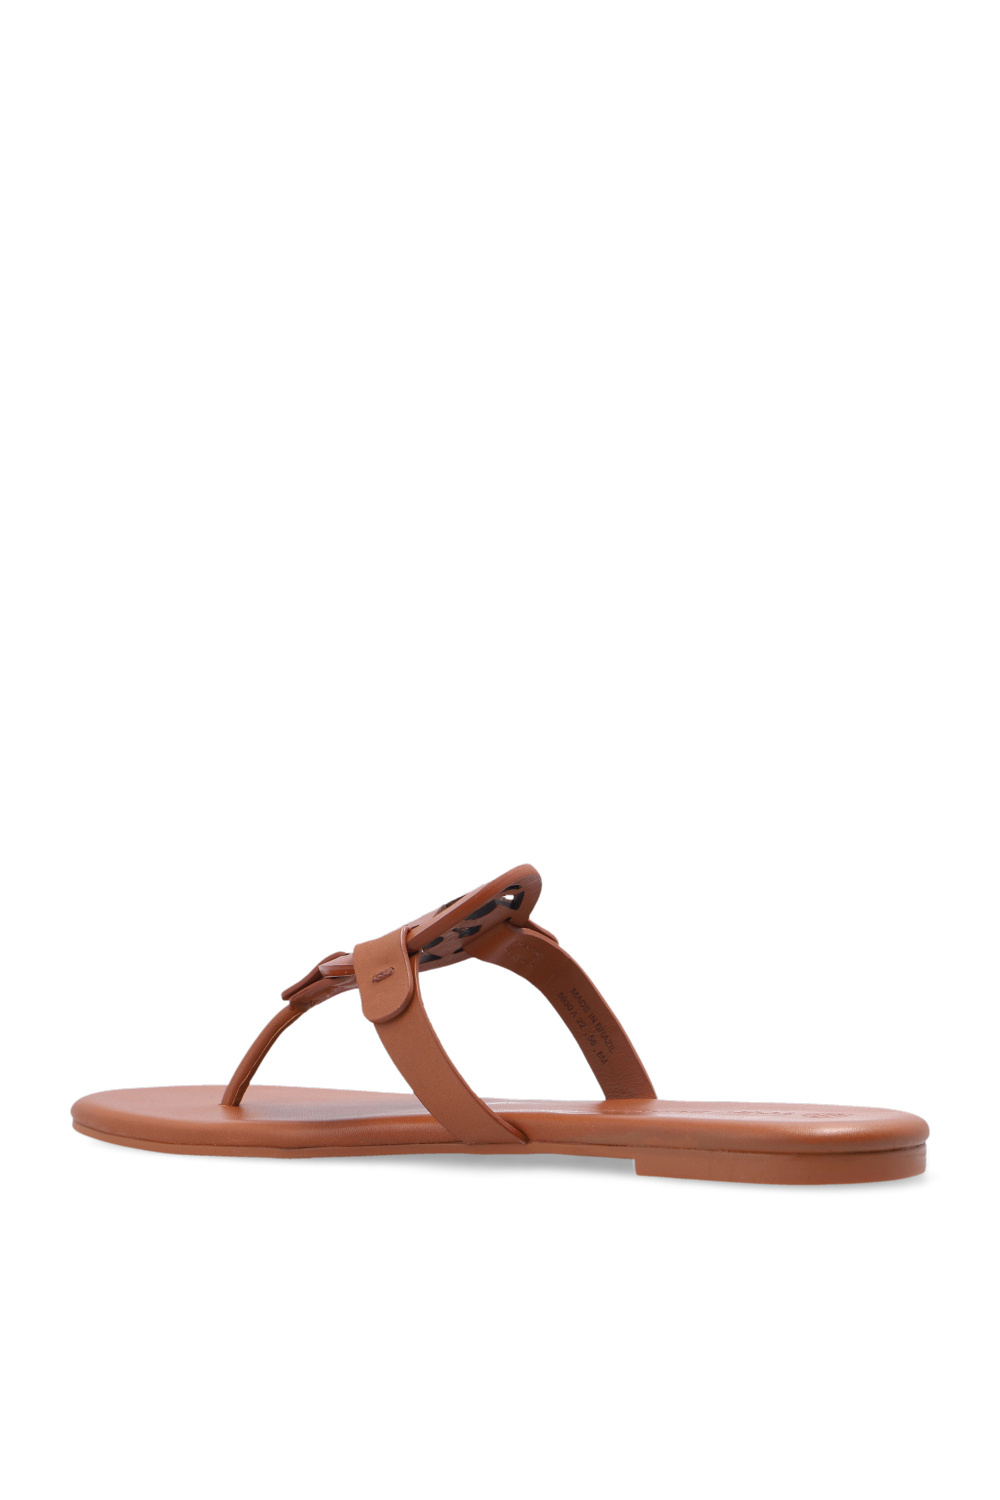 Tory Burch Miller Leather Thong Sandals In Blu